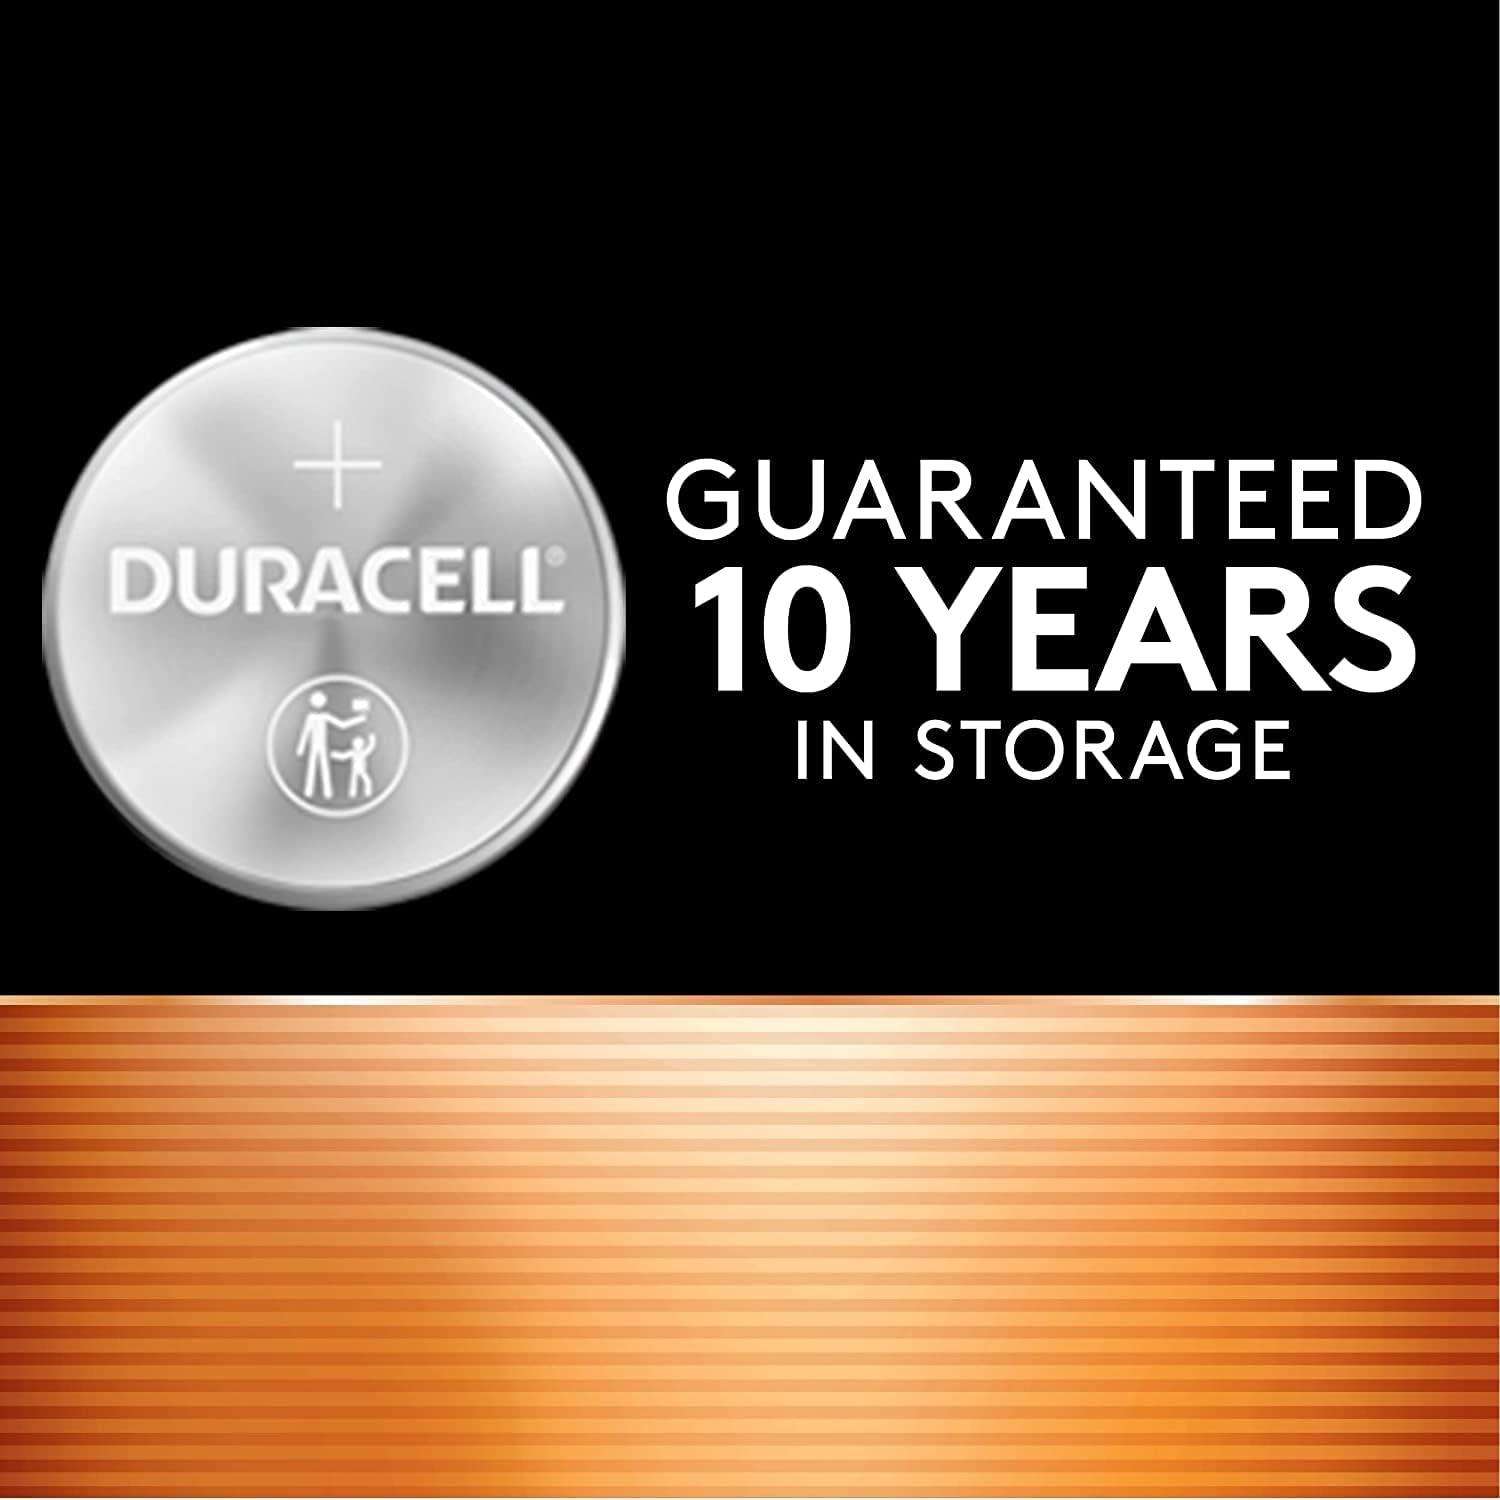 Duracell 2032 3V lithim Coin batry - 1 count 